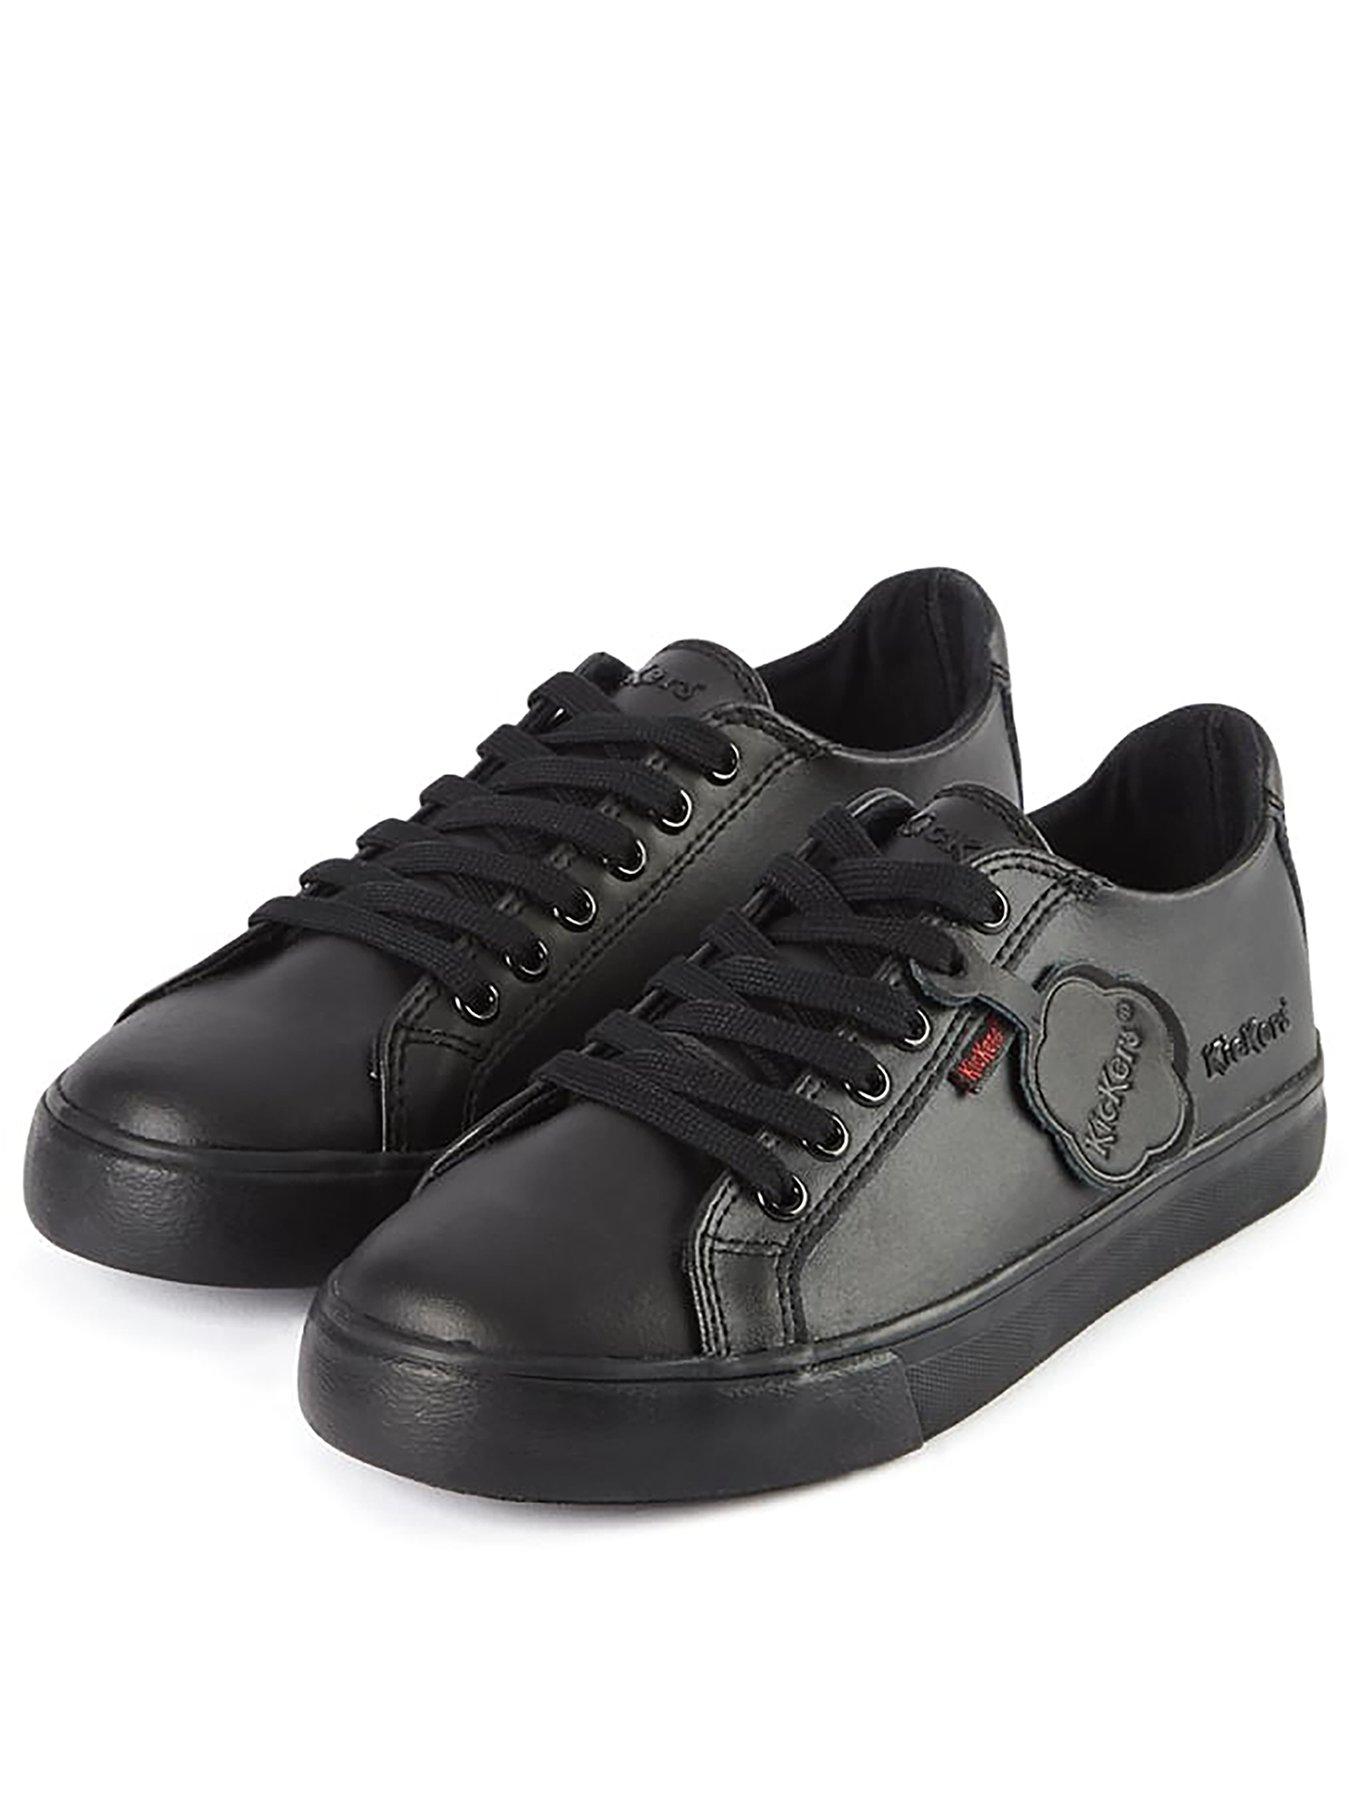 Kickers Tovni Leather Lace Plimsoll - Black | very.co.uk